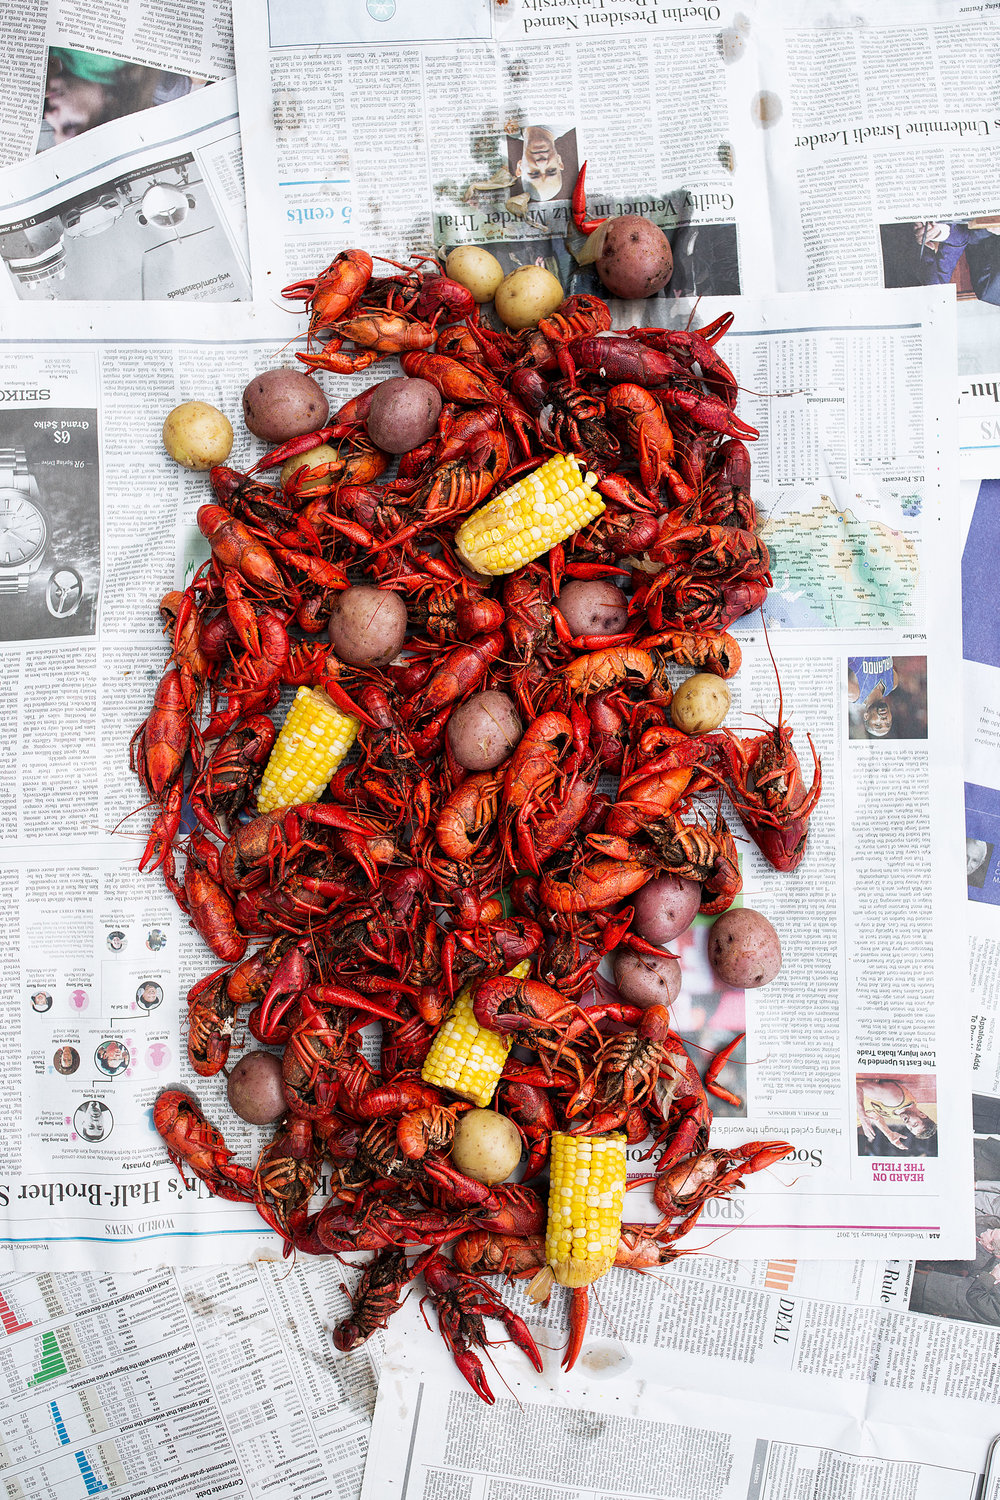 traditional southern crawfish boil recipe with corn and potatoes spread on newspaper